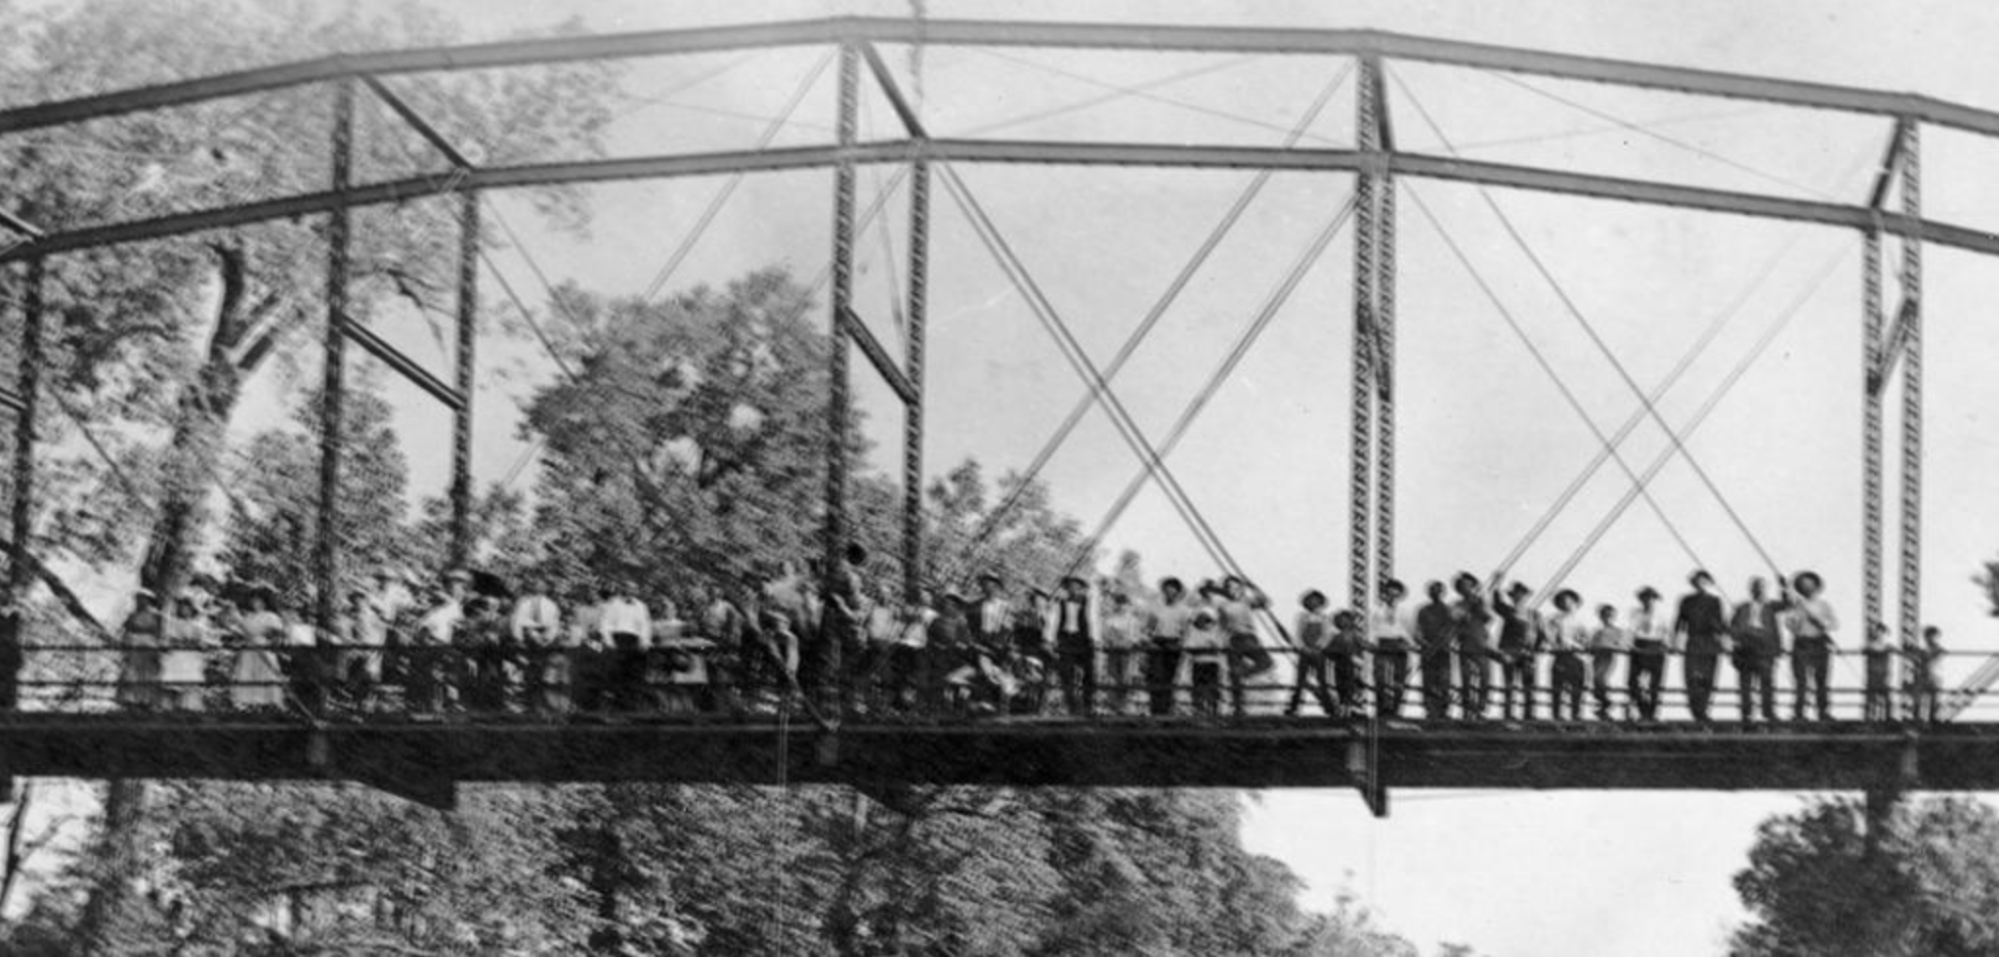 Crowd poses for image on bridge where Mrs. Nelson and her son are lynched.